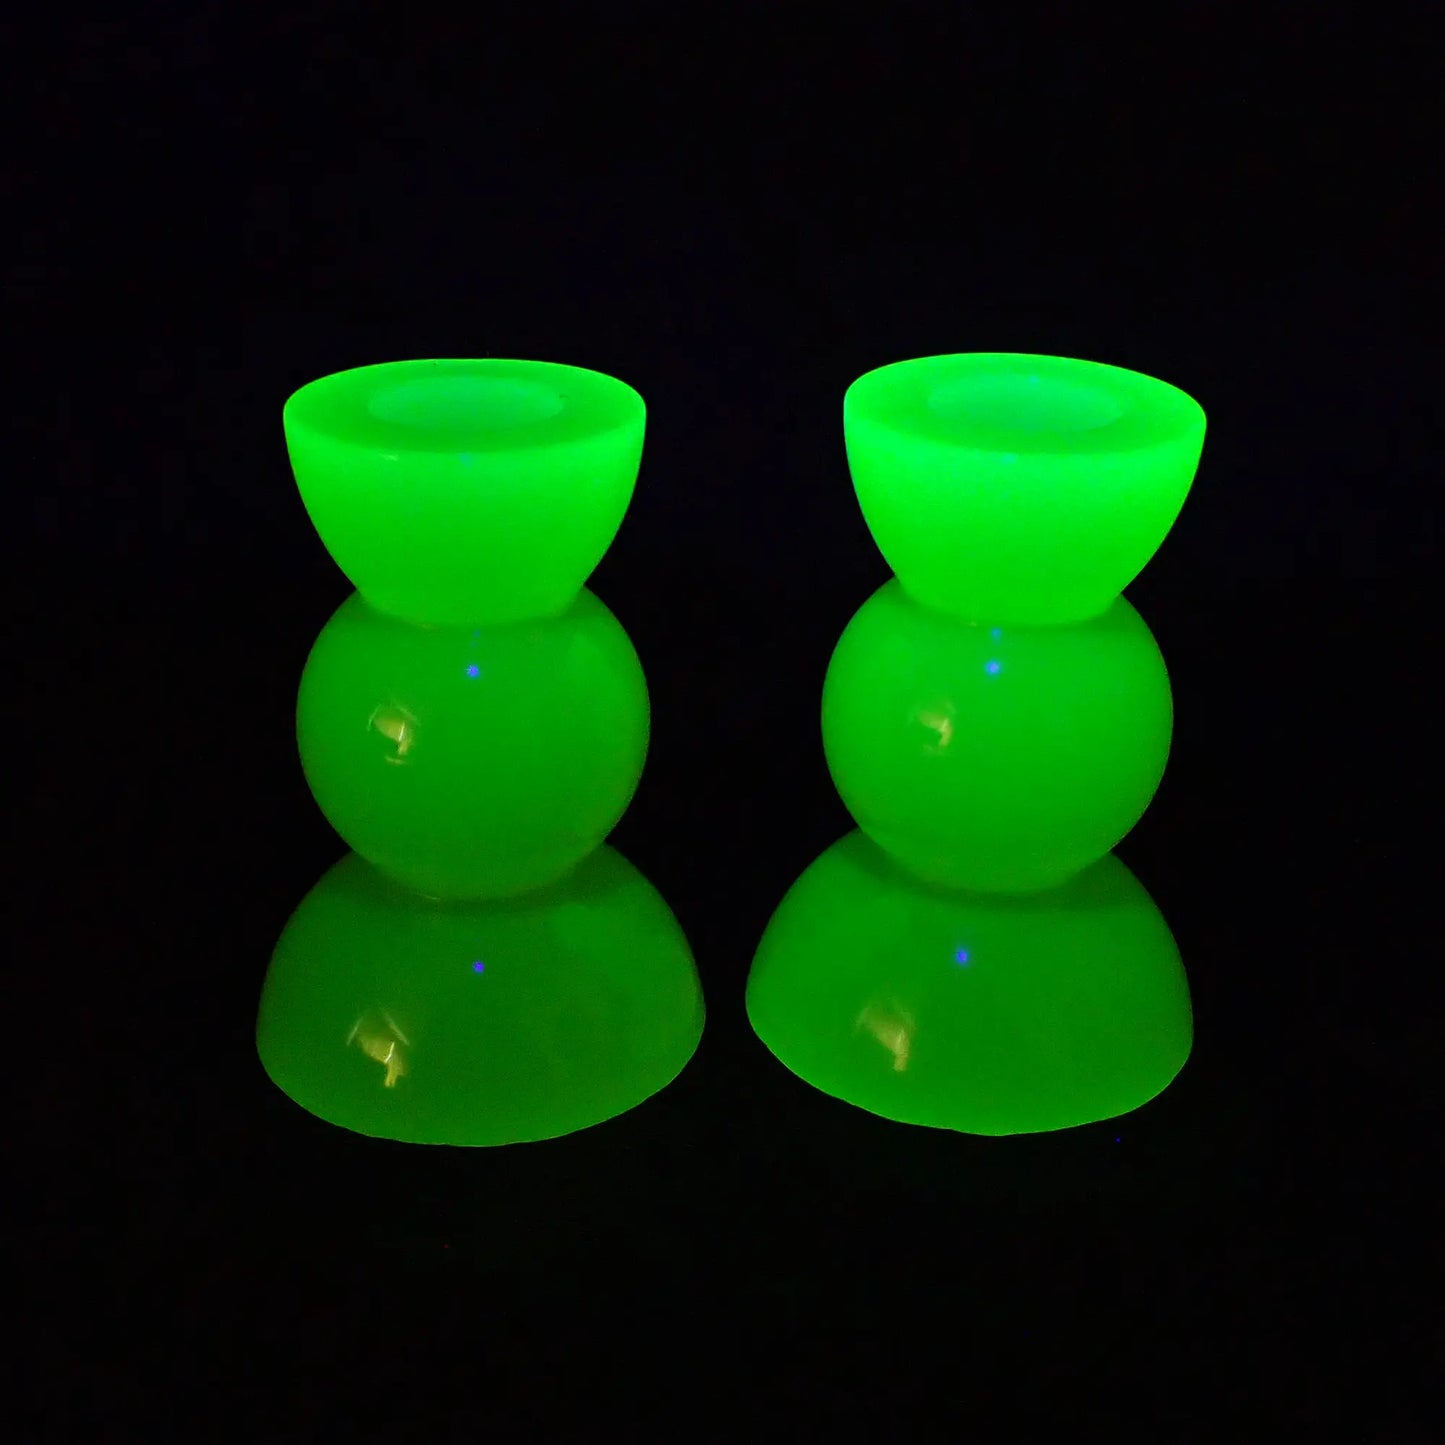 Photo showing the handmade resin neon yellow geometric candlestick holders fluorescing a bright neon green under a UV light.